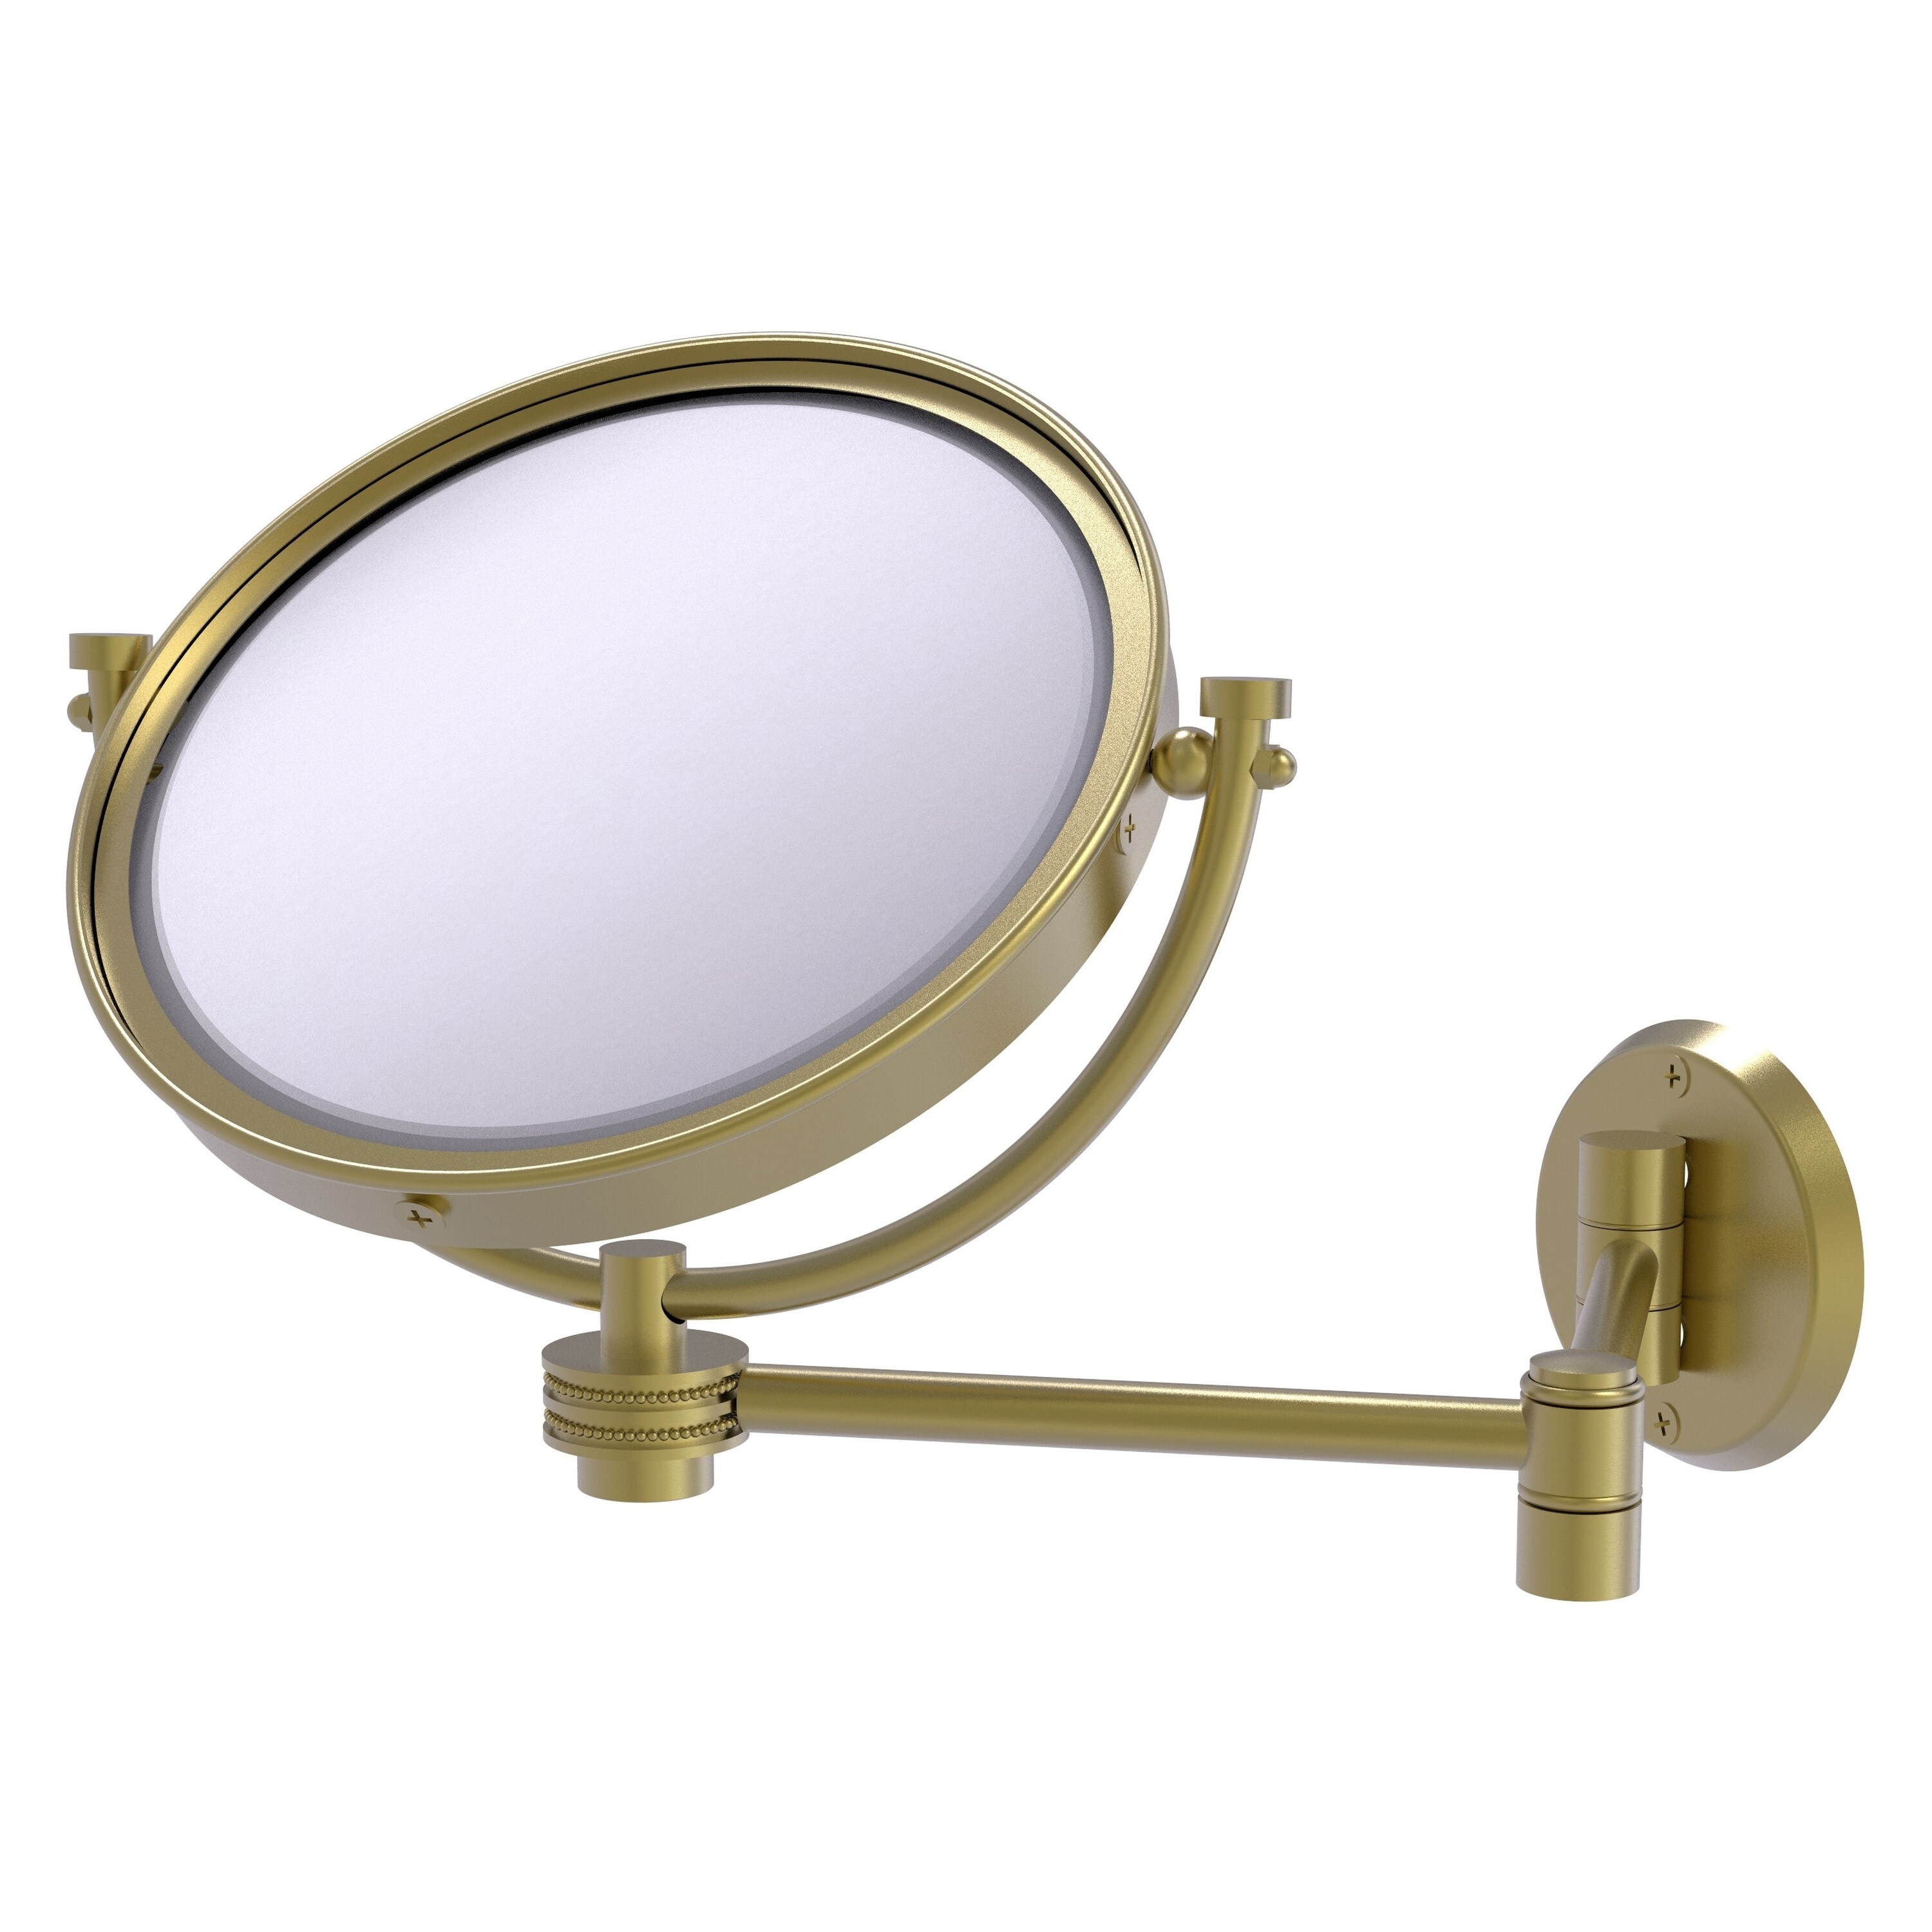 8-in x 10-in Satin Chrome Double-sided 3X Magnifying Wall-mounted Vanity Mirror | - Allied Brass WM-6D/3X-SBR